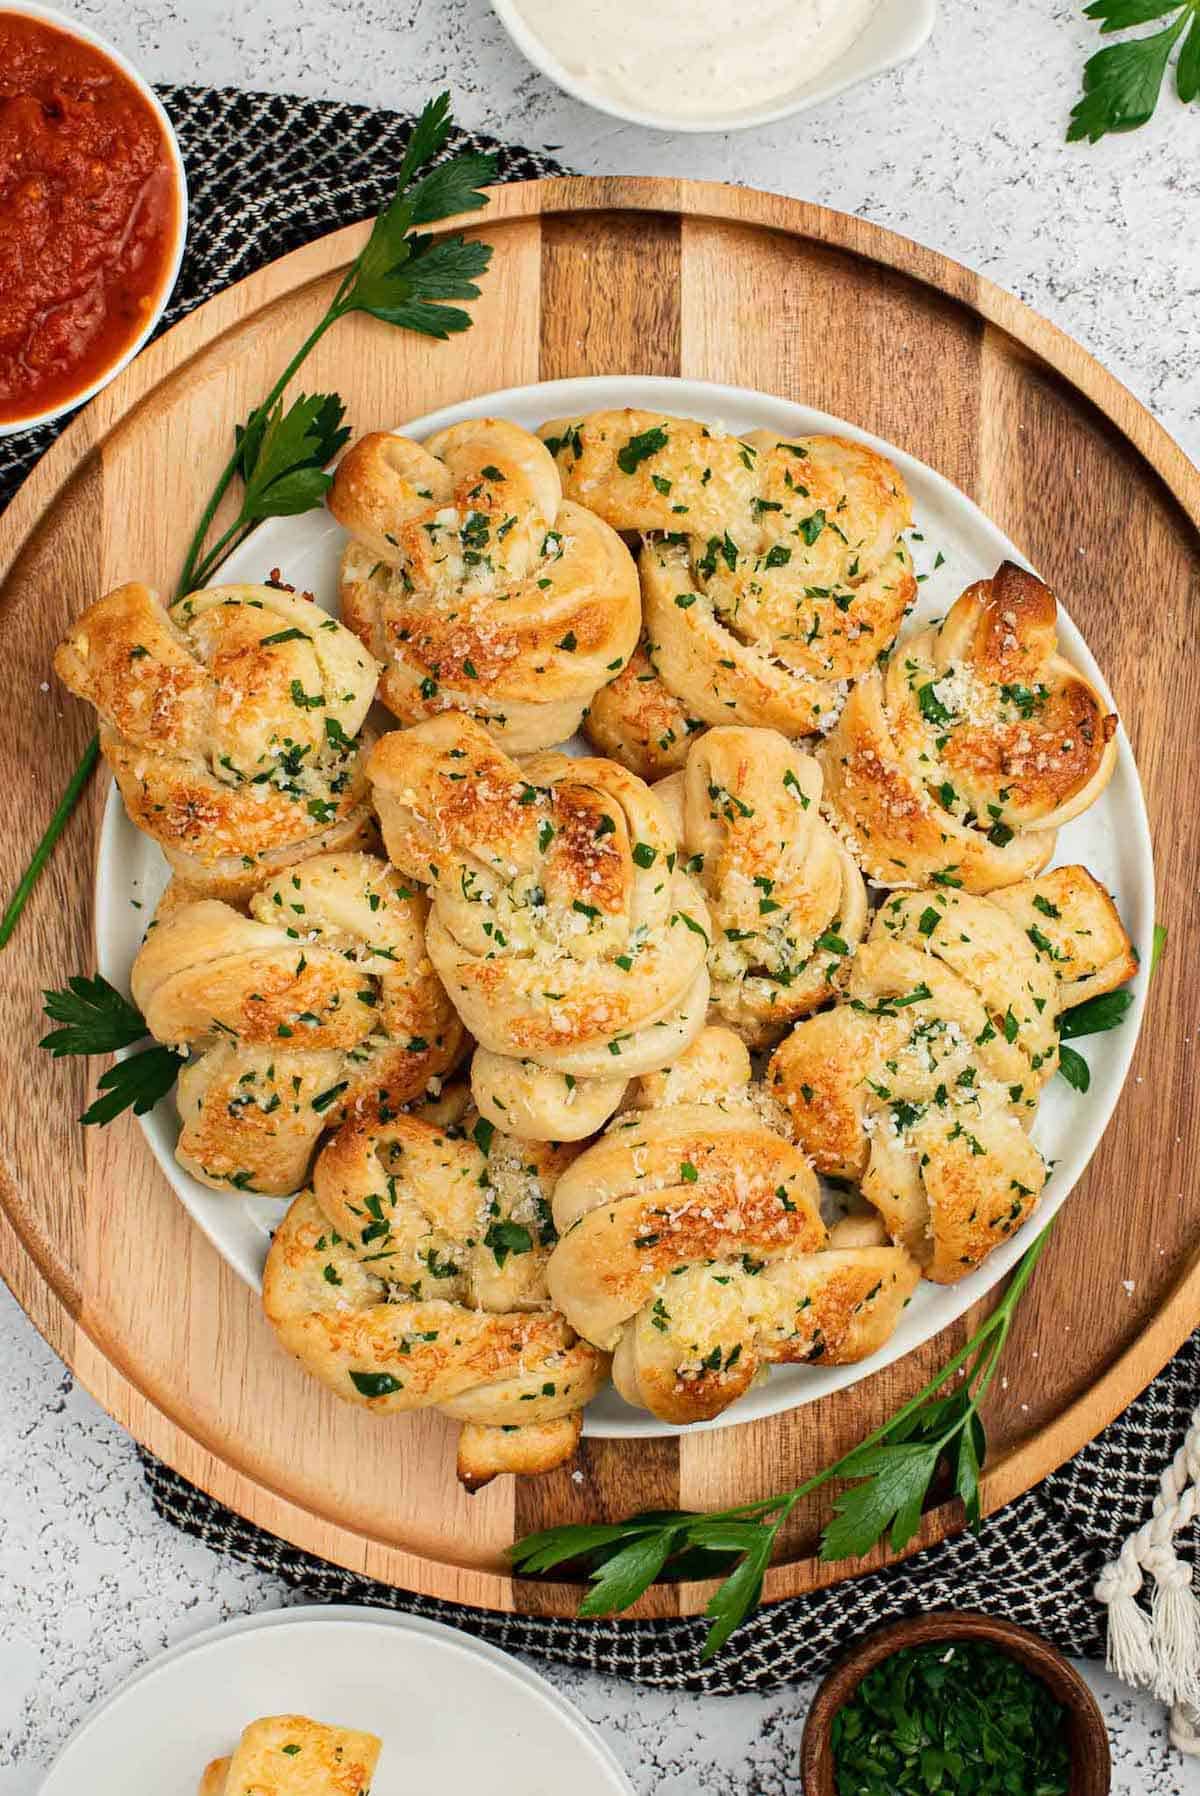 A plate of garlic knots with a side of marinara sauce.